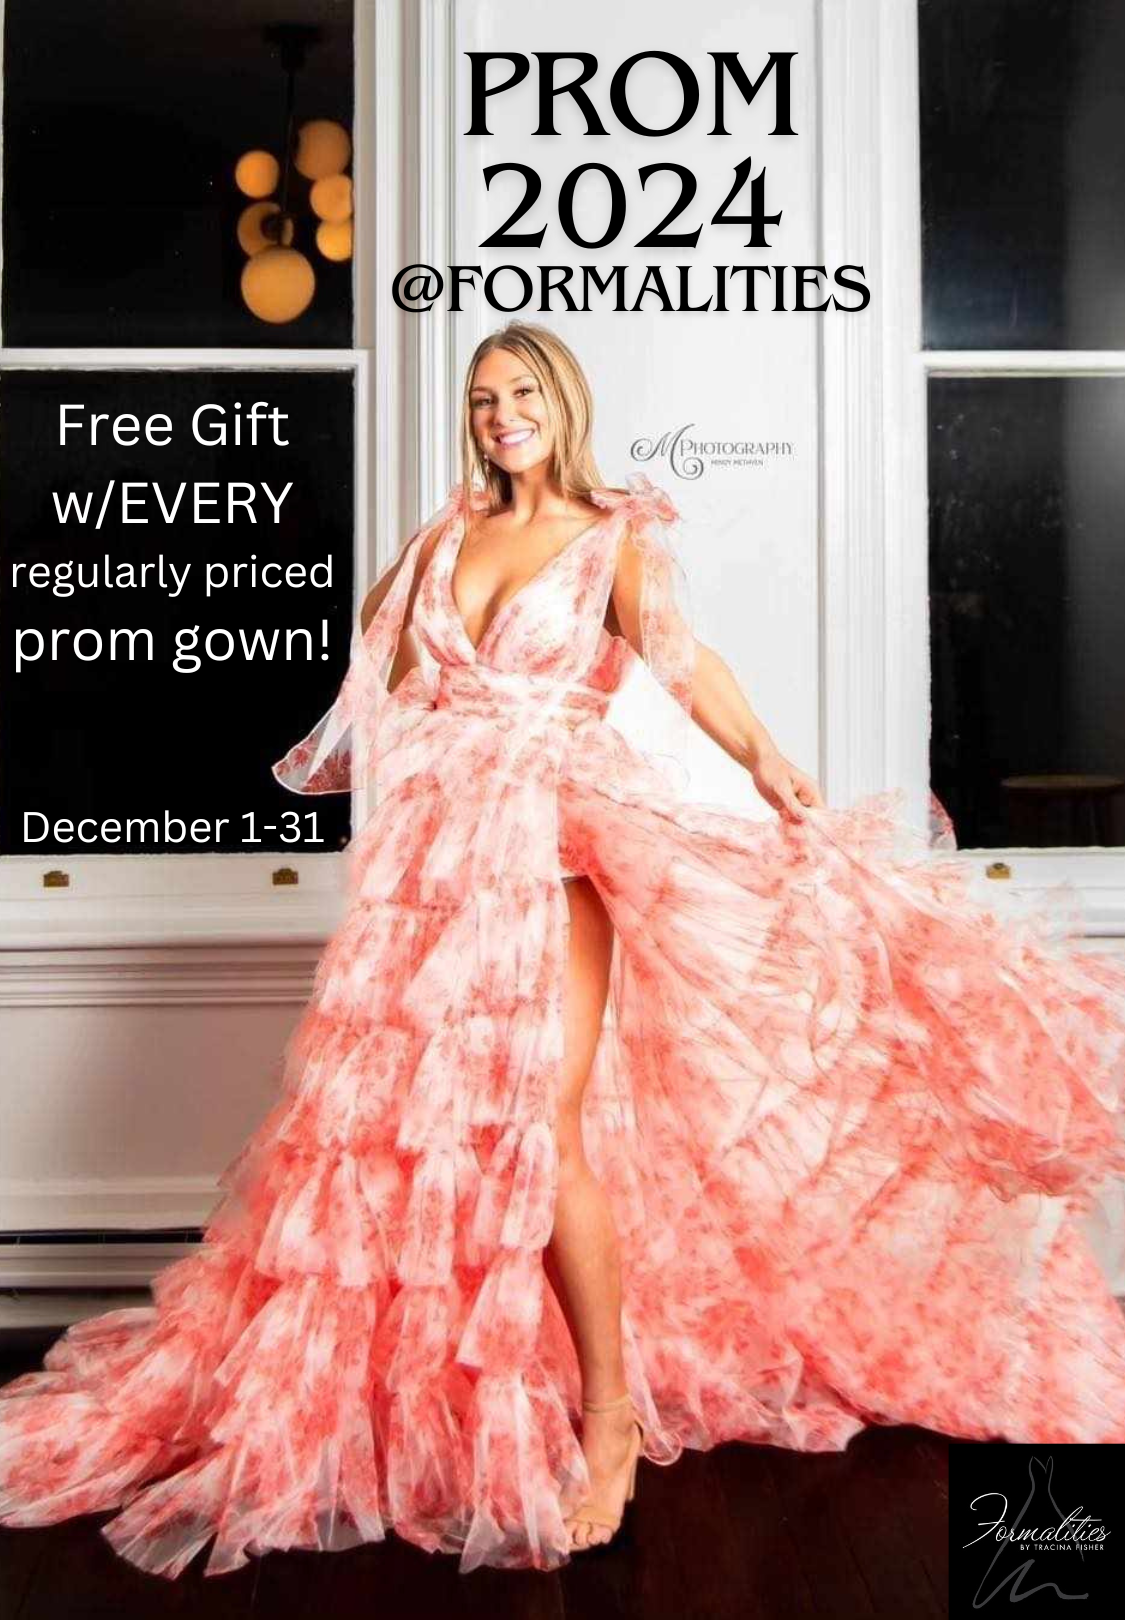 Shop Prom 2024 @Formalities for FREE STUFF!